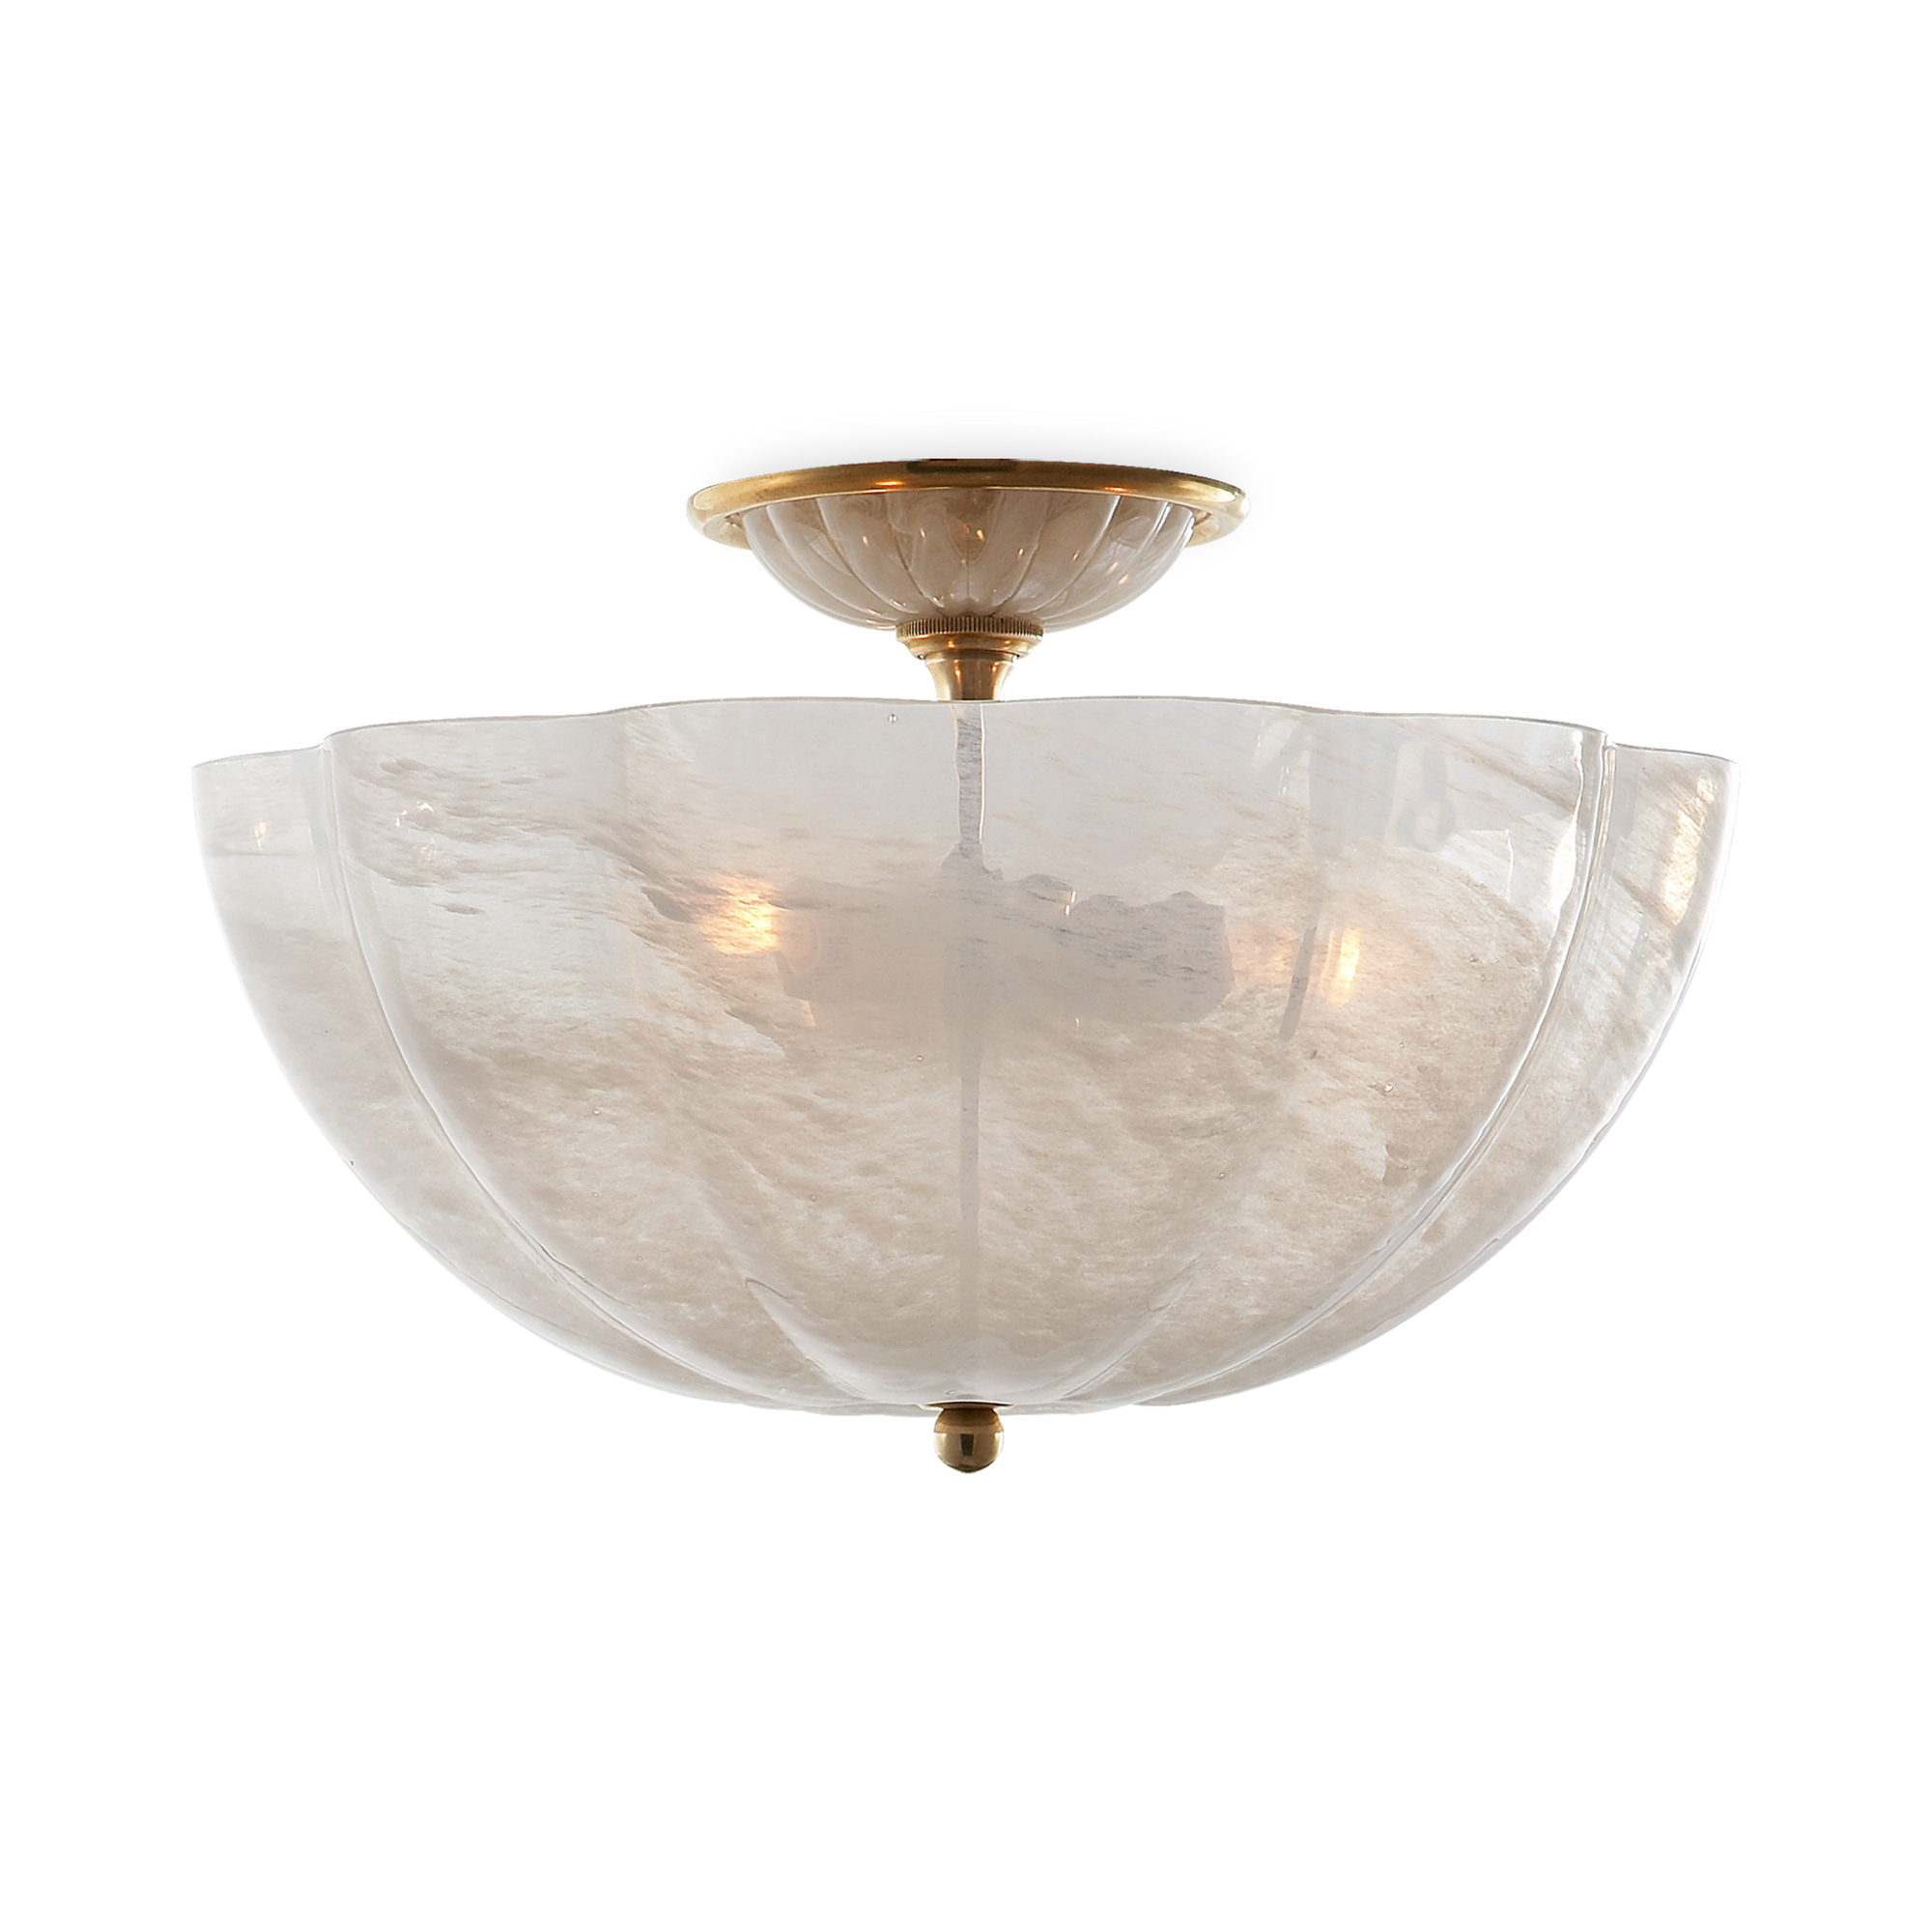 The Rosehill Semi Flush Mount is inspired by old world glamour and European midcentury design.